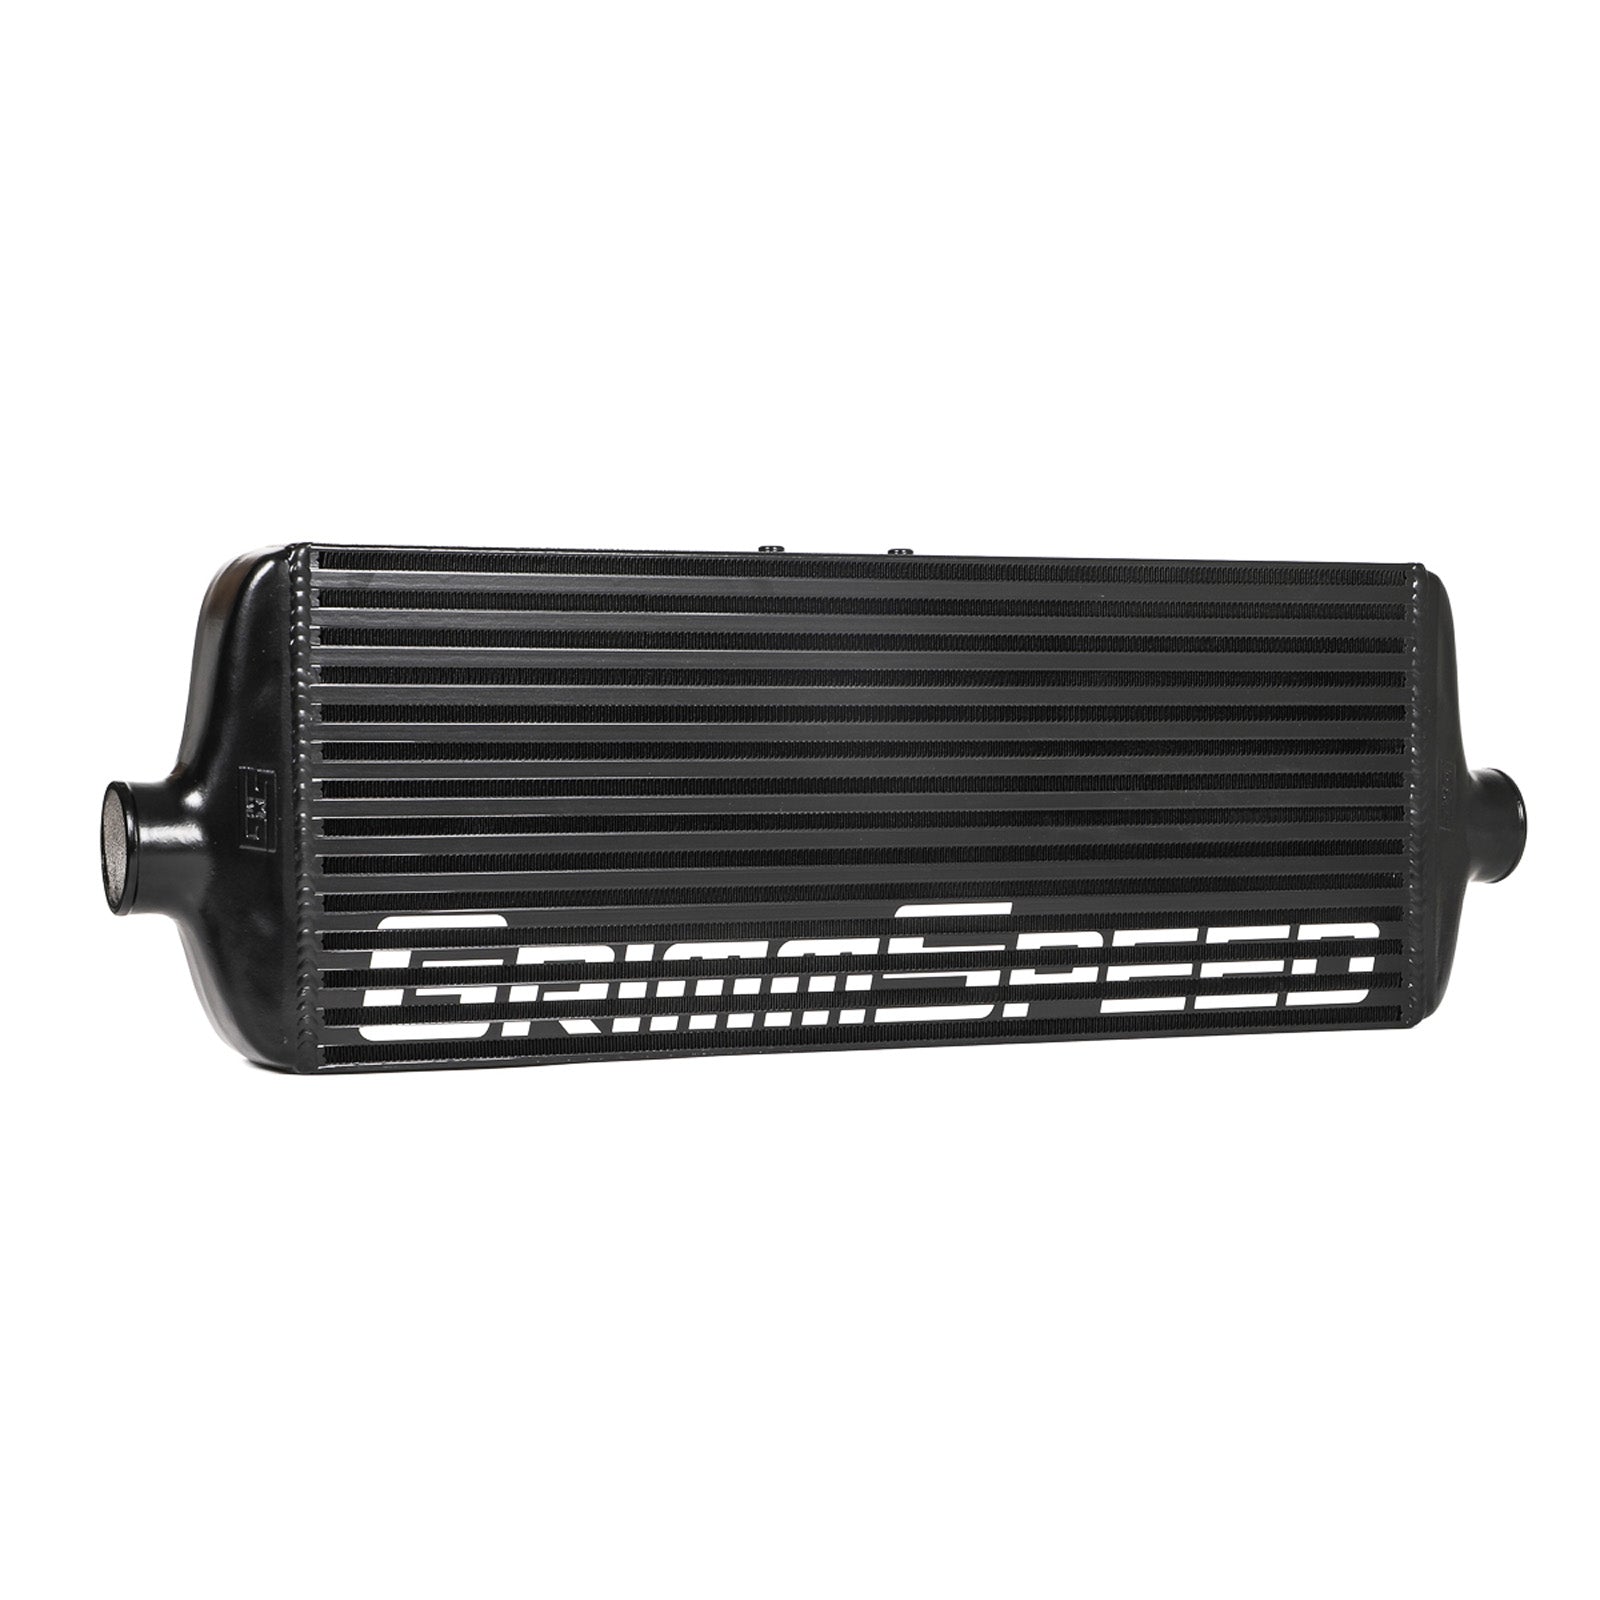 GrimmSpeed Front Mount Intercooler Kit - Black Core with Red Piping - 2015-21 Subaru STI - 0